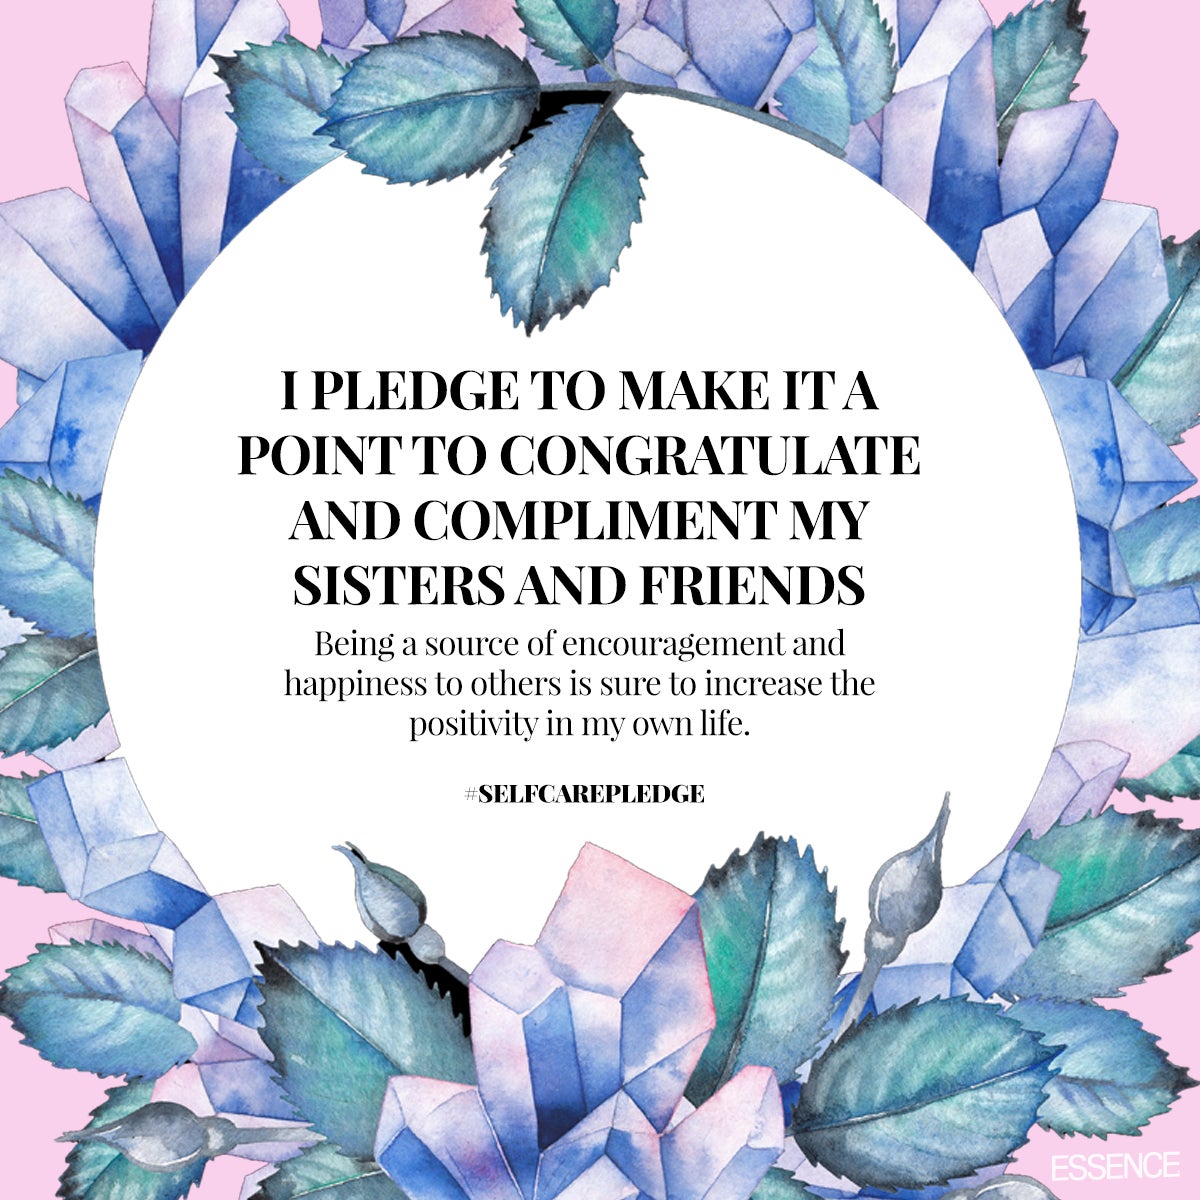 15 Self-Care Pledges Every Black Woman Should Take To Manifest More Greatness